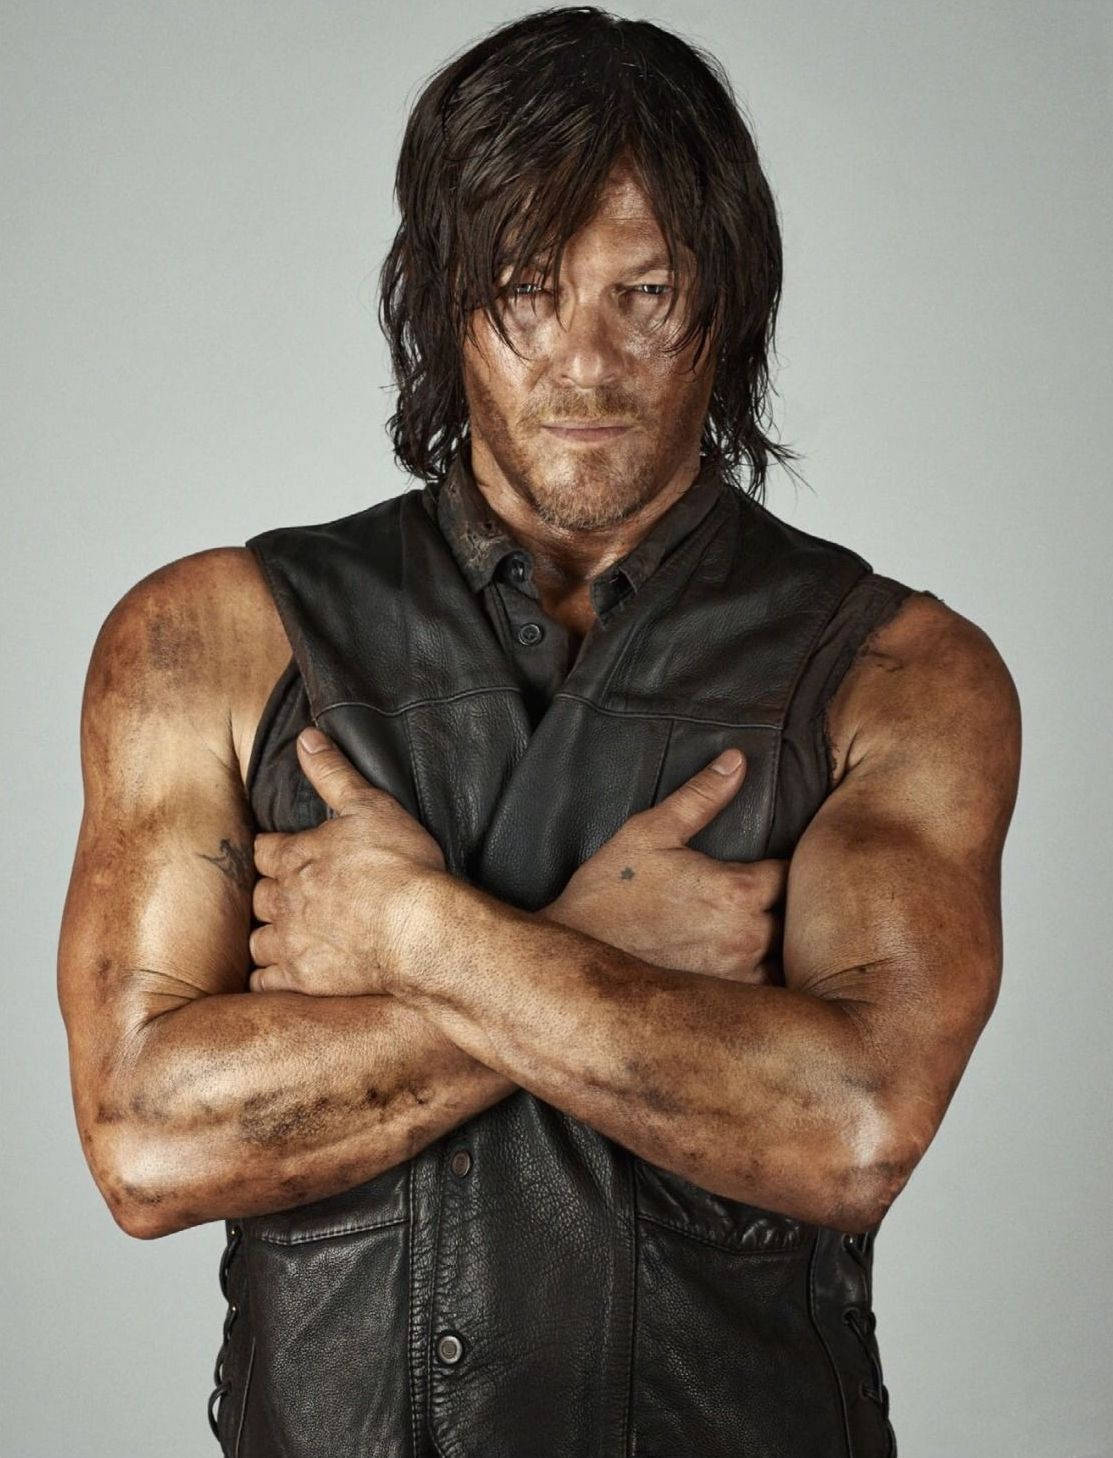 The Walking Dead's Daryl Dixon, Ready to Take on What's Next Wallpaper